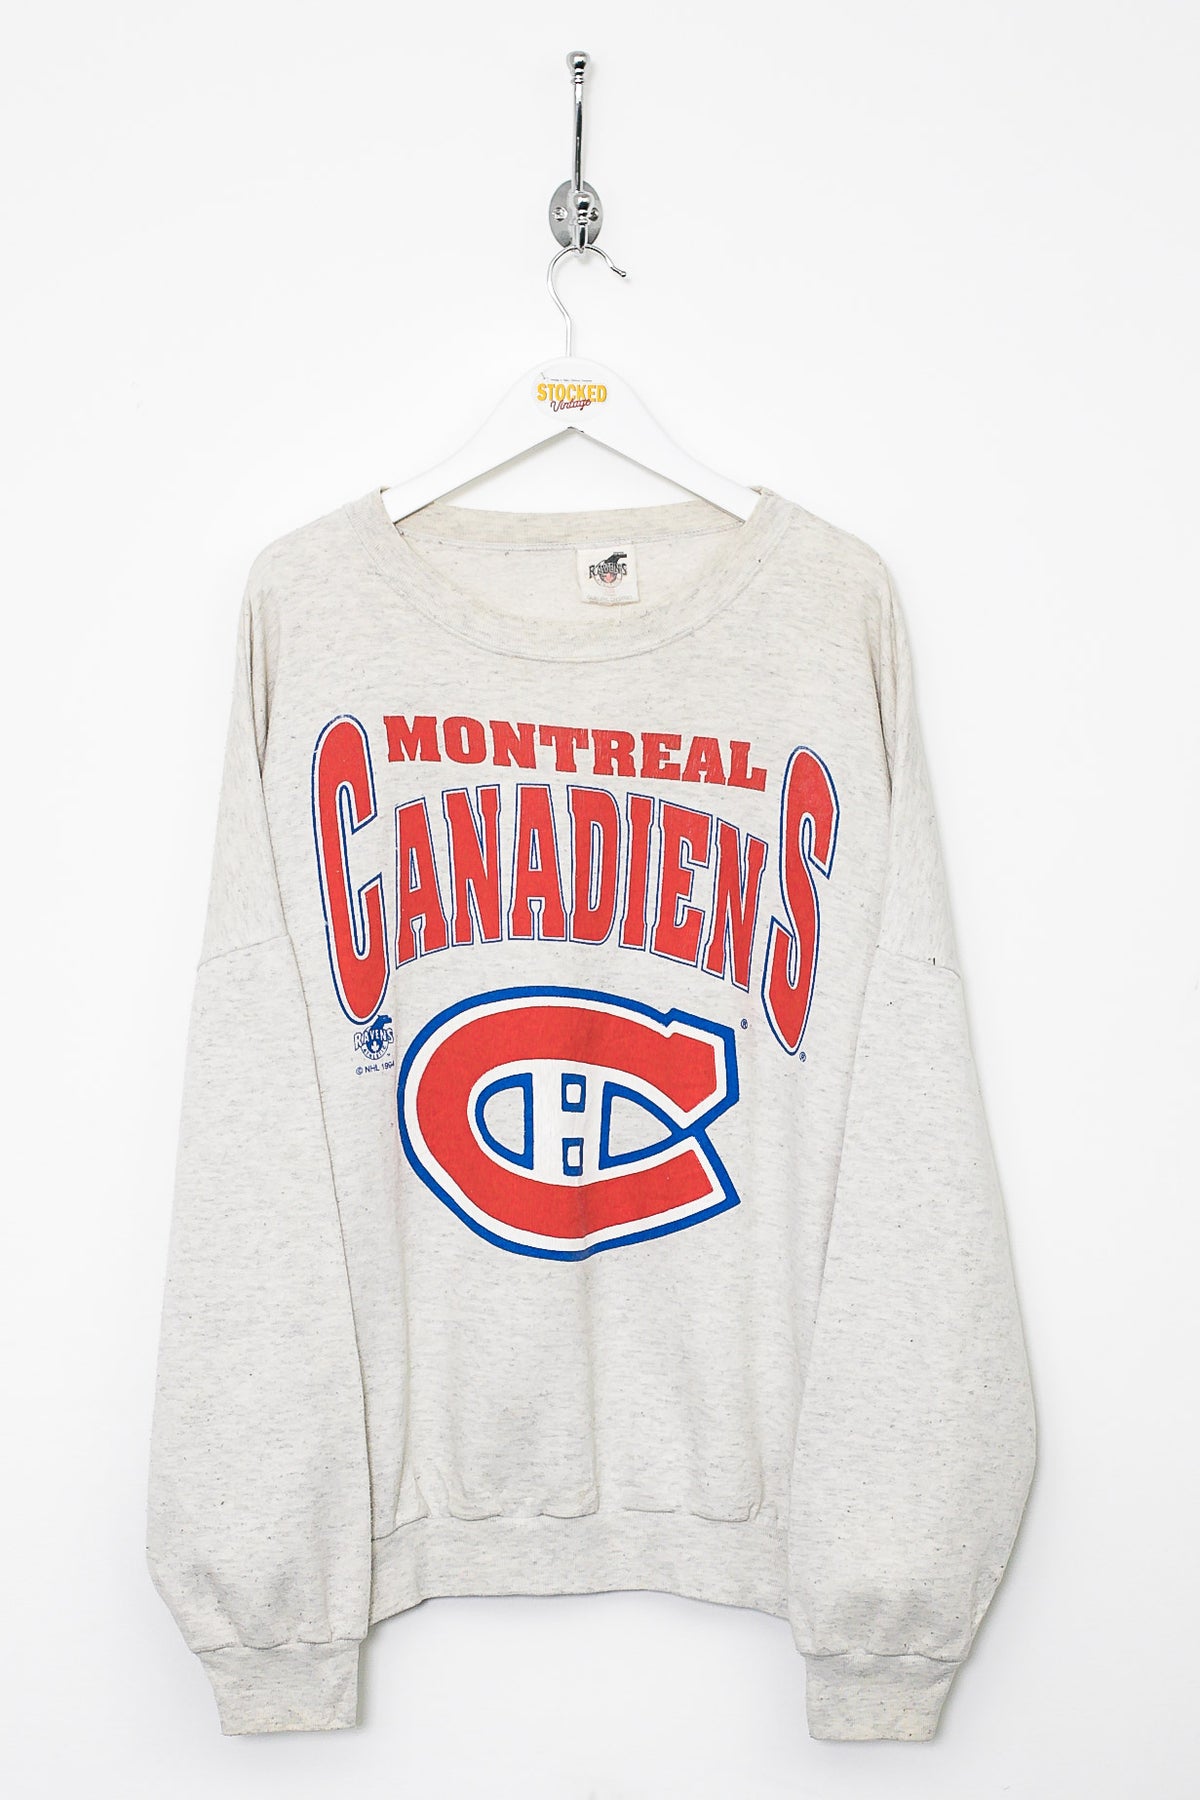 NHL Montreal Canadiens T-shirt (Size M)